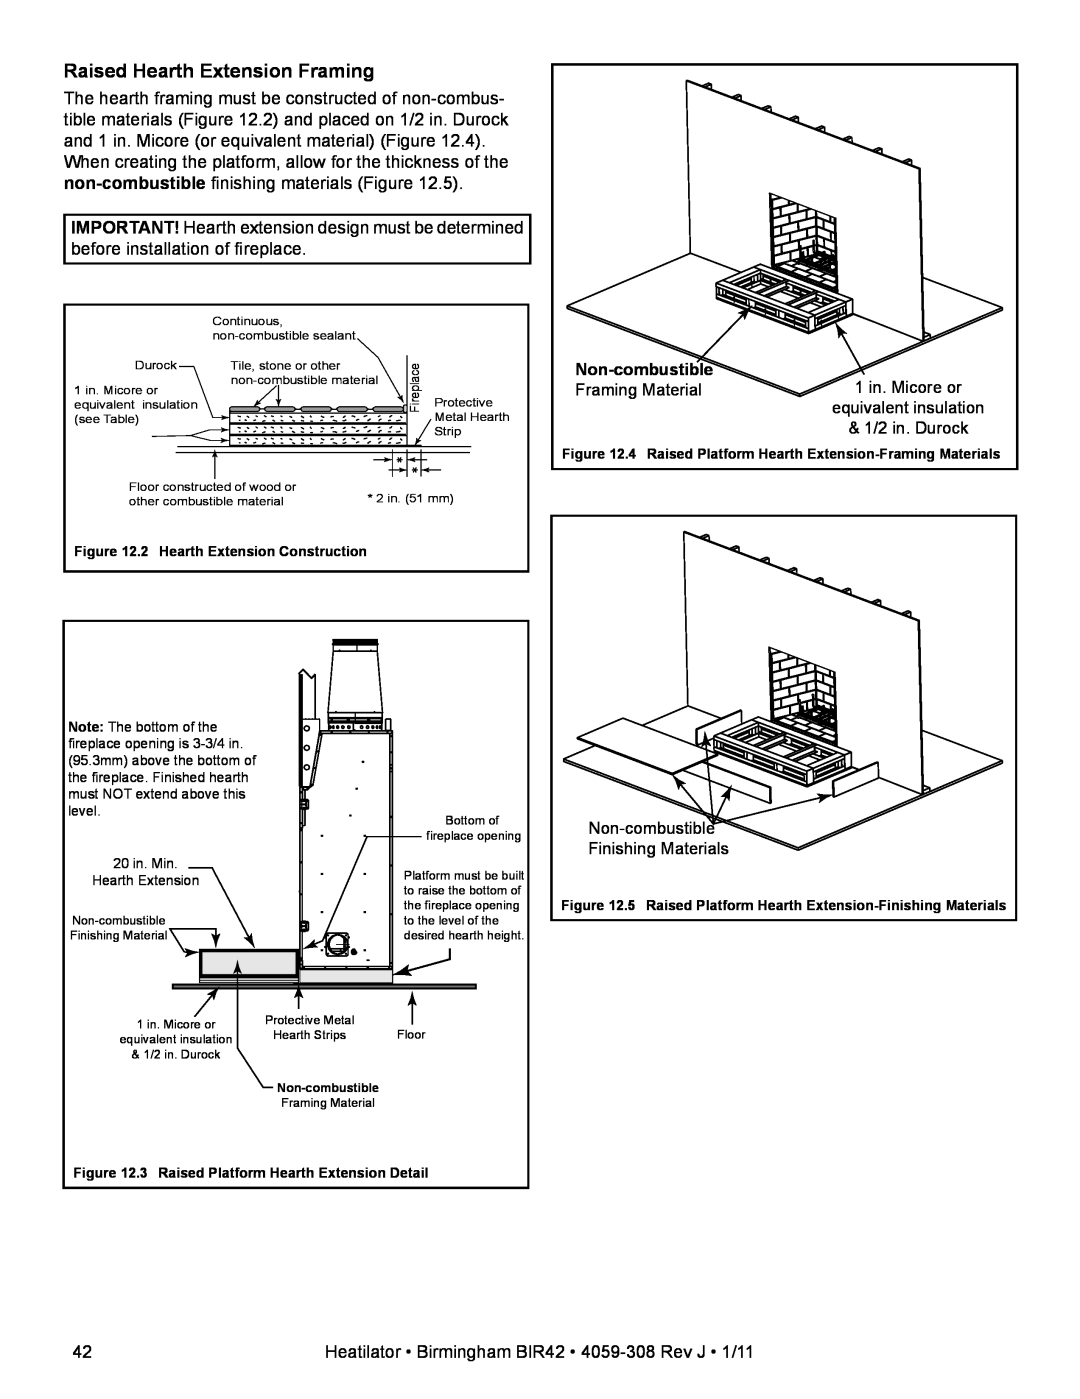 Heatiator BIR42 owner manual Raised Hearth Extension Framing, Non-combustible, Framing Material, equivalent insulation 